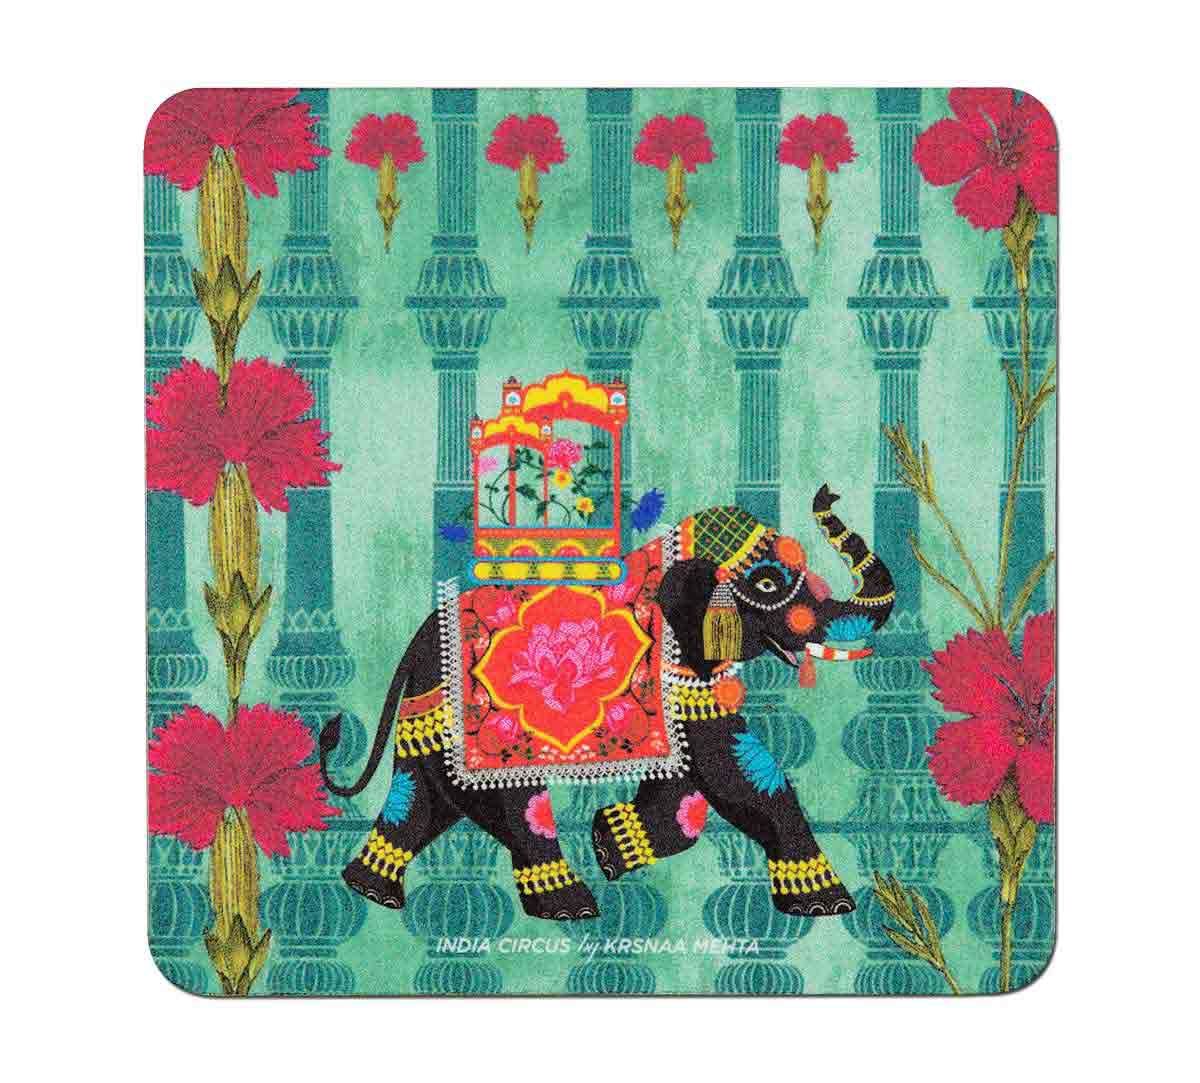 India Circus Tusker Chariot Table Coaster Set of 6